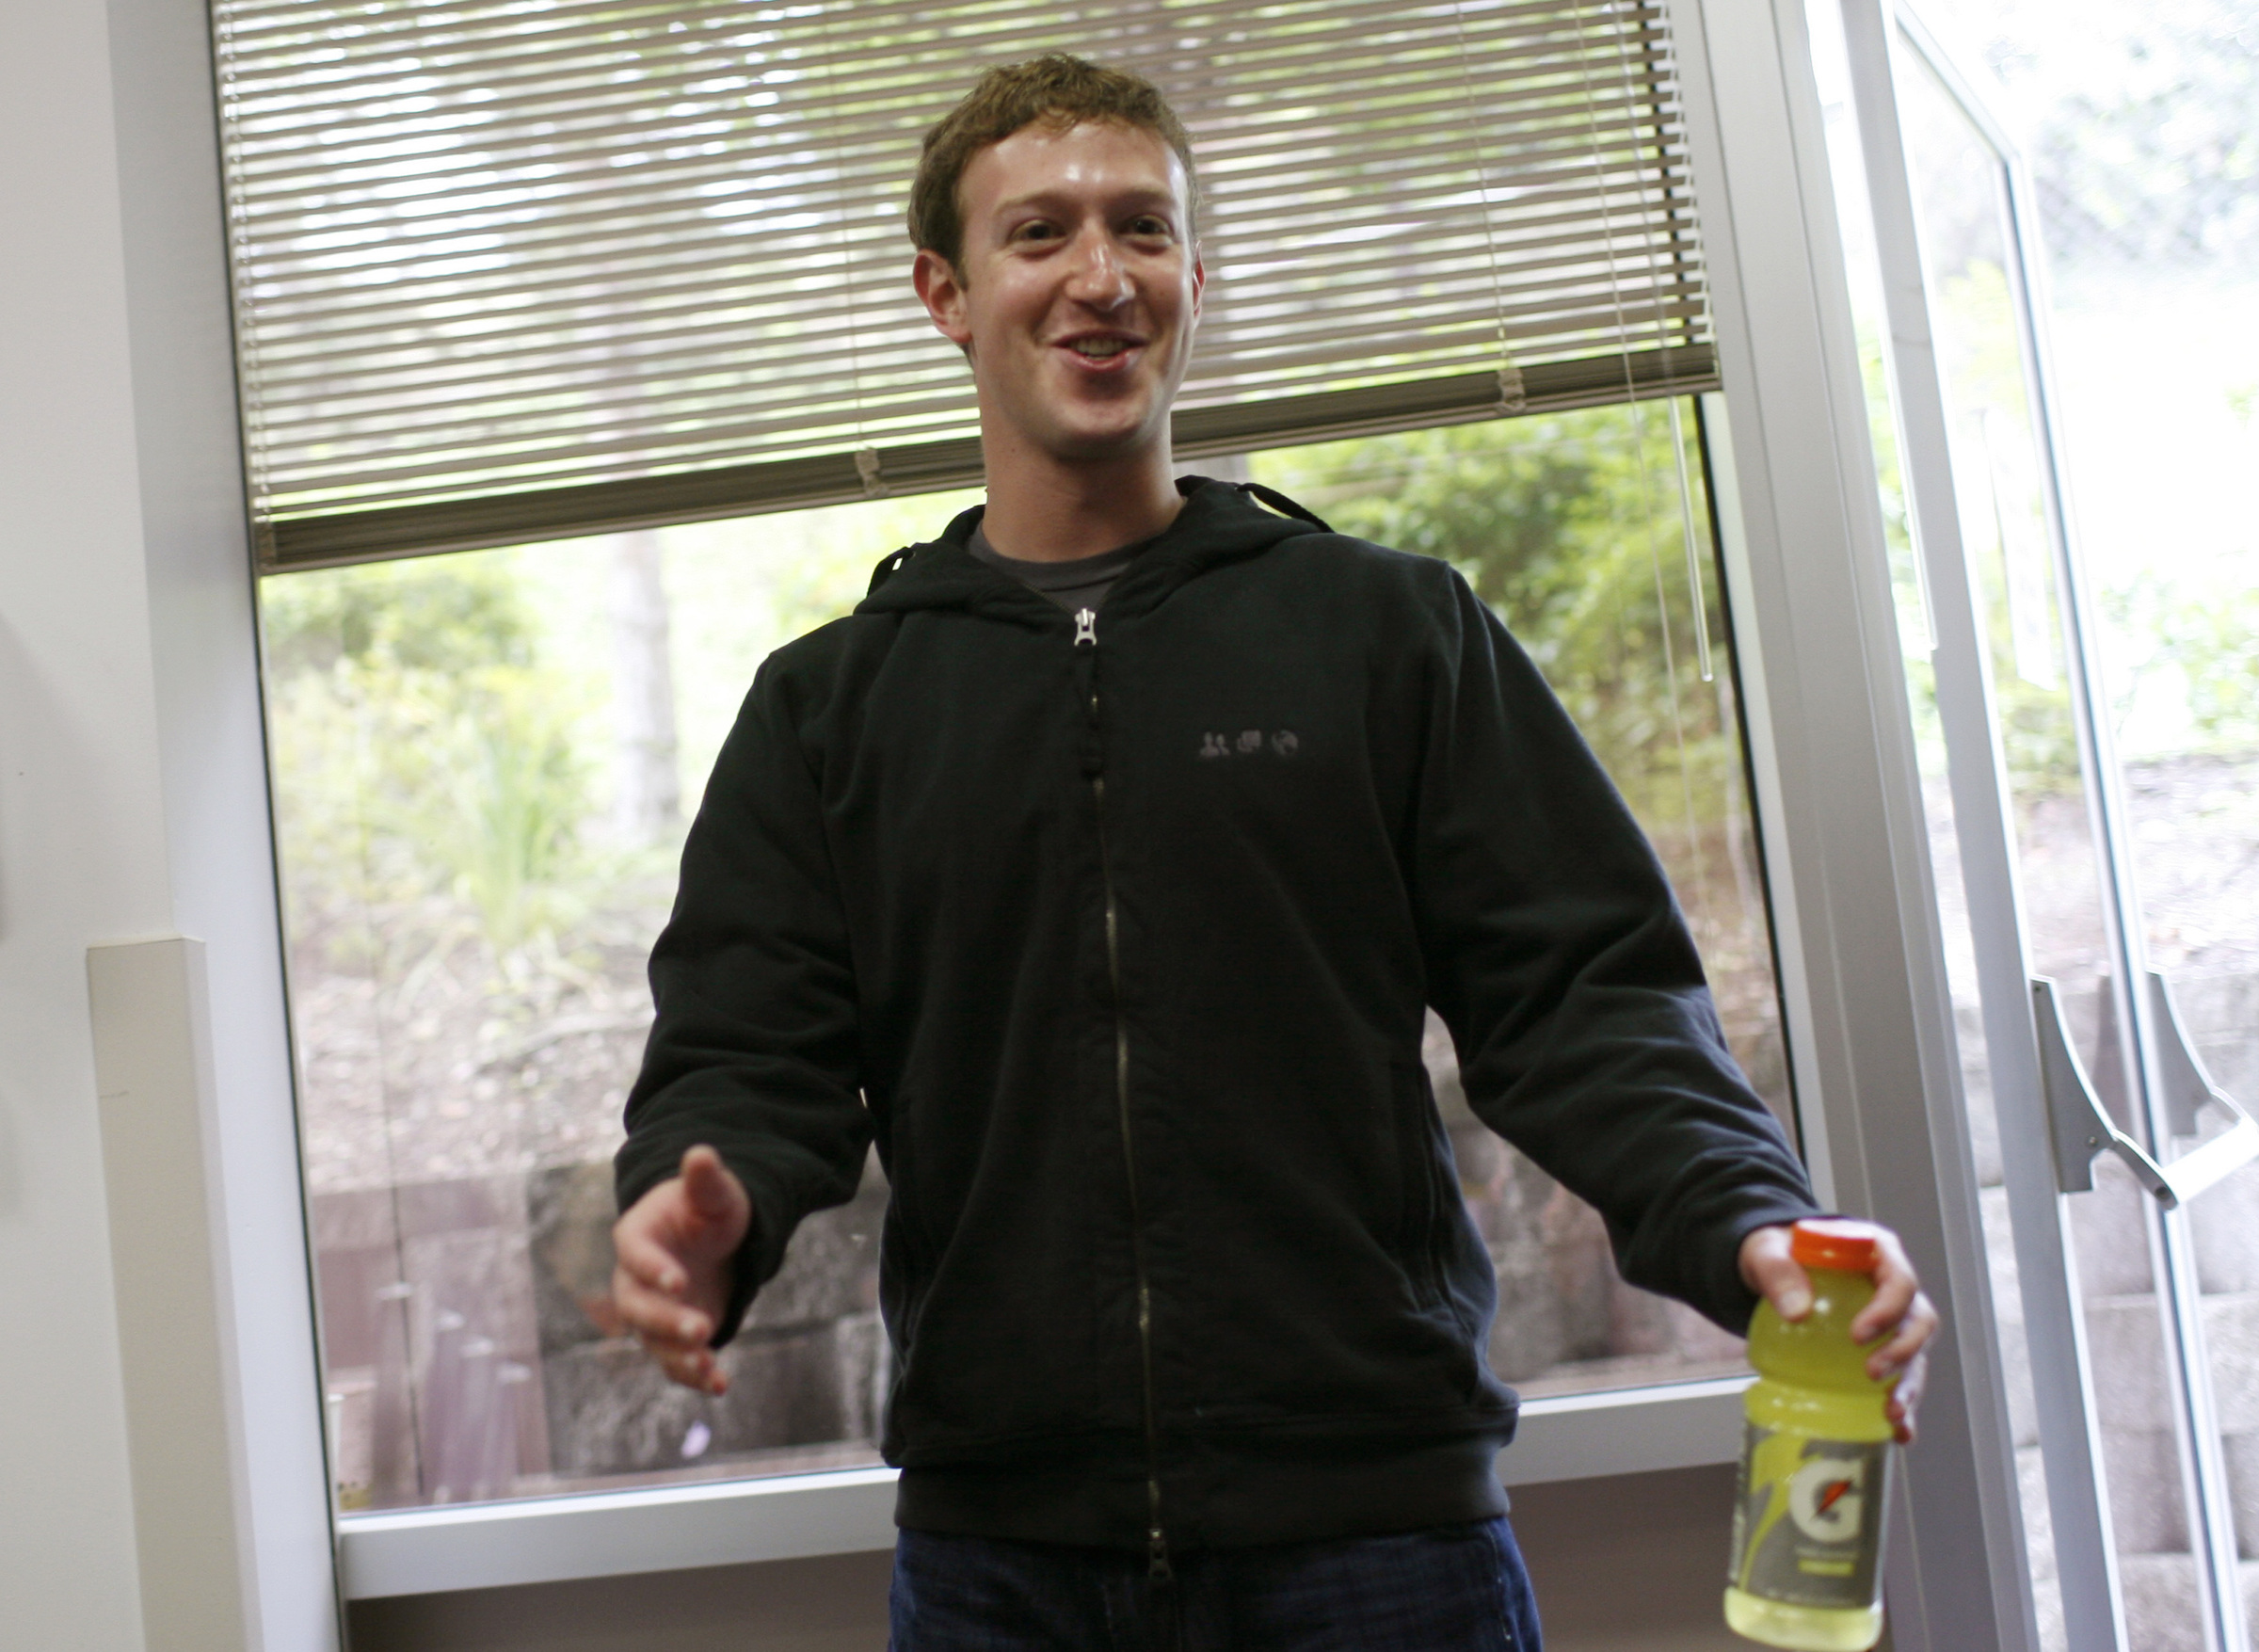 Facebook CEO Mark Zuckerberg reacts prior to a news conference at Facebook headquarters in Palo Alto. Reuters